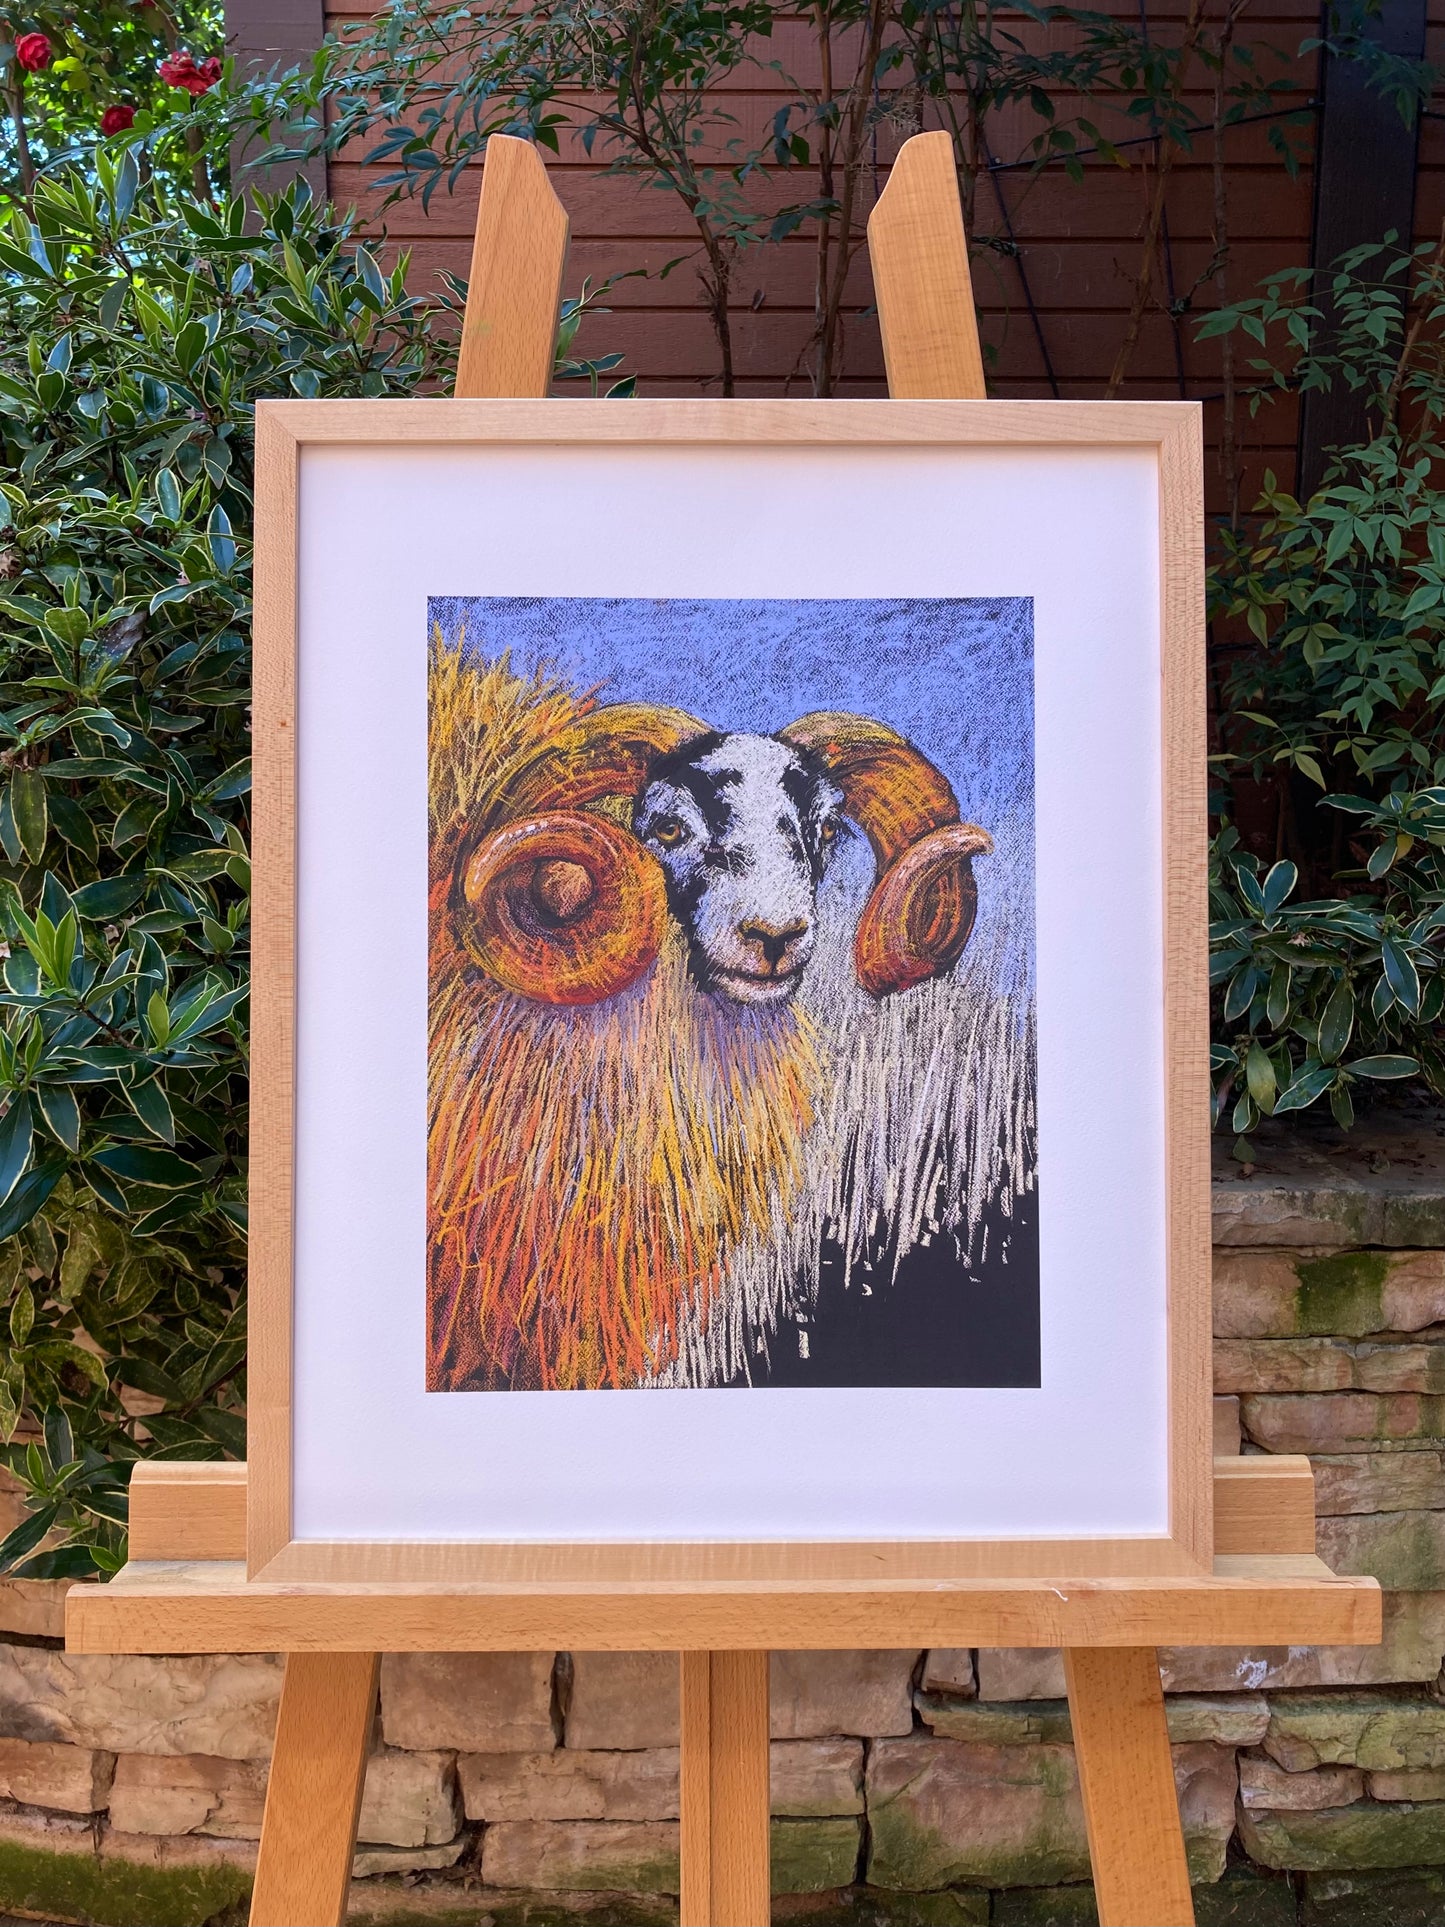 Swaledale Sheep in example wooden frame.